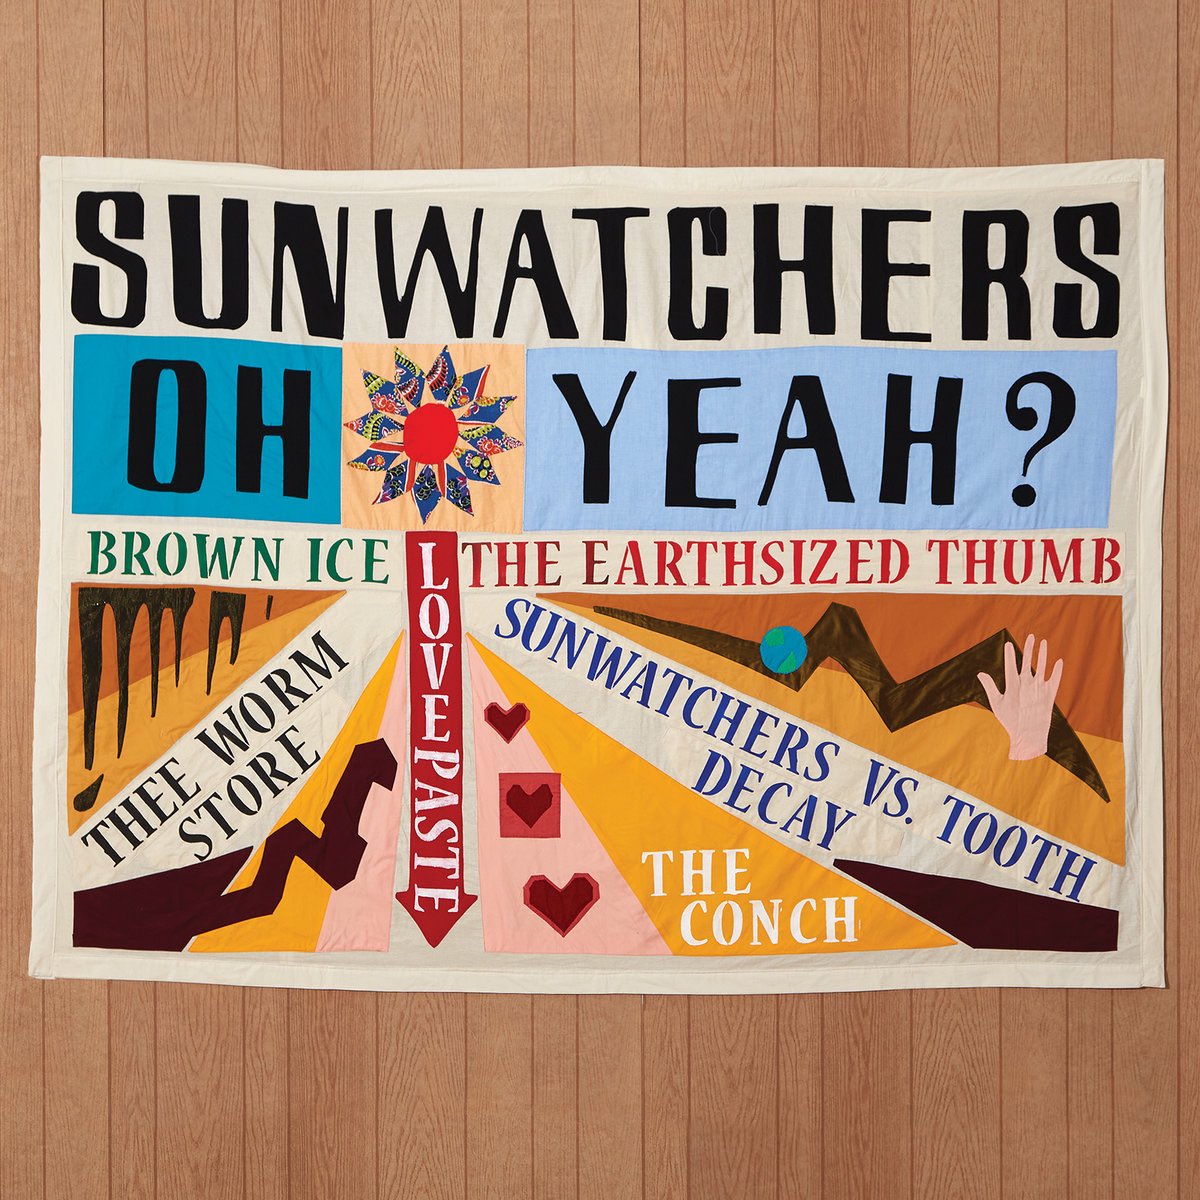 28. Sunwatchers - Oh Yeah? (Just crazy heavy psych jams)